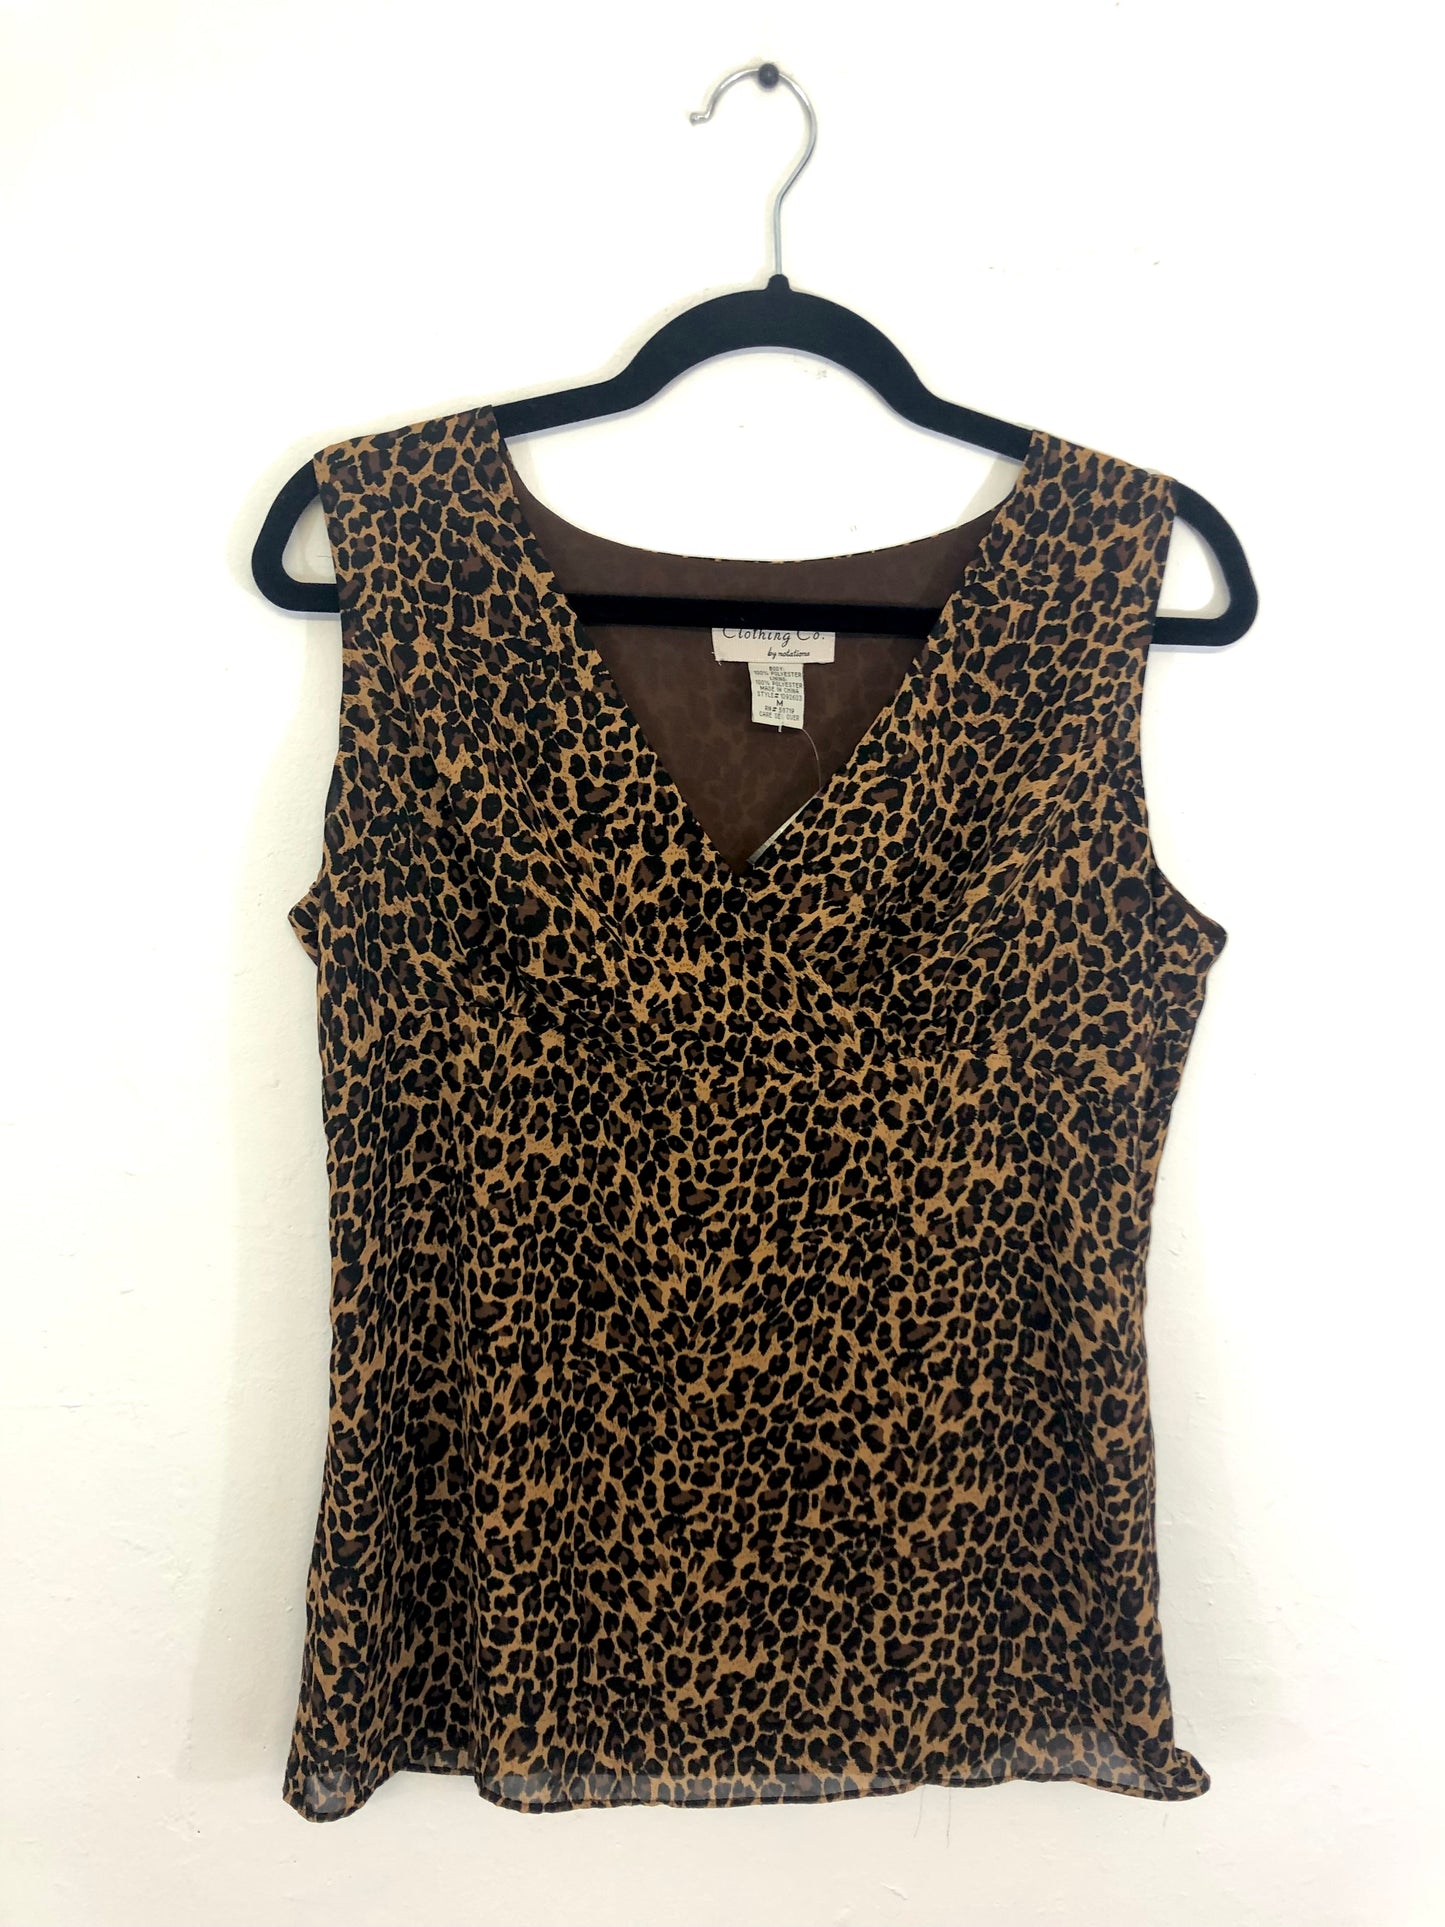 Clothing Co by Notations Leopard Blouse